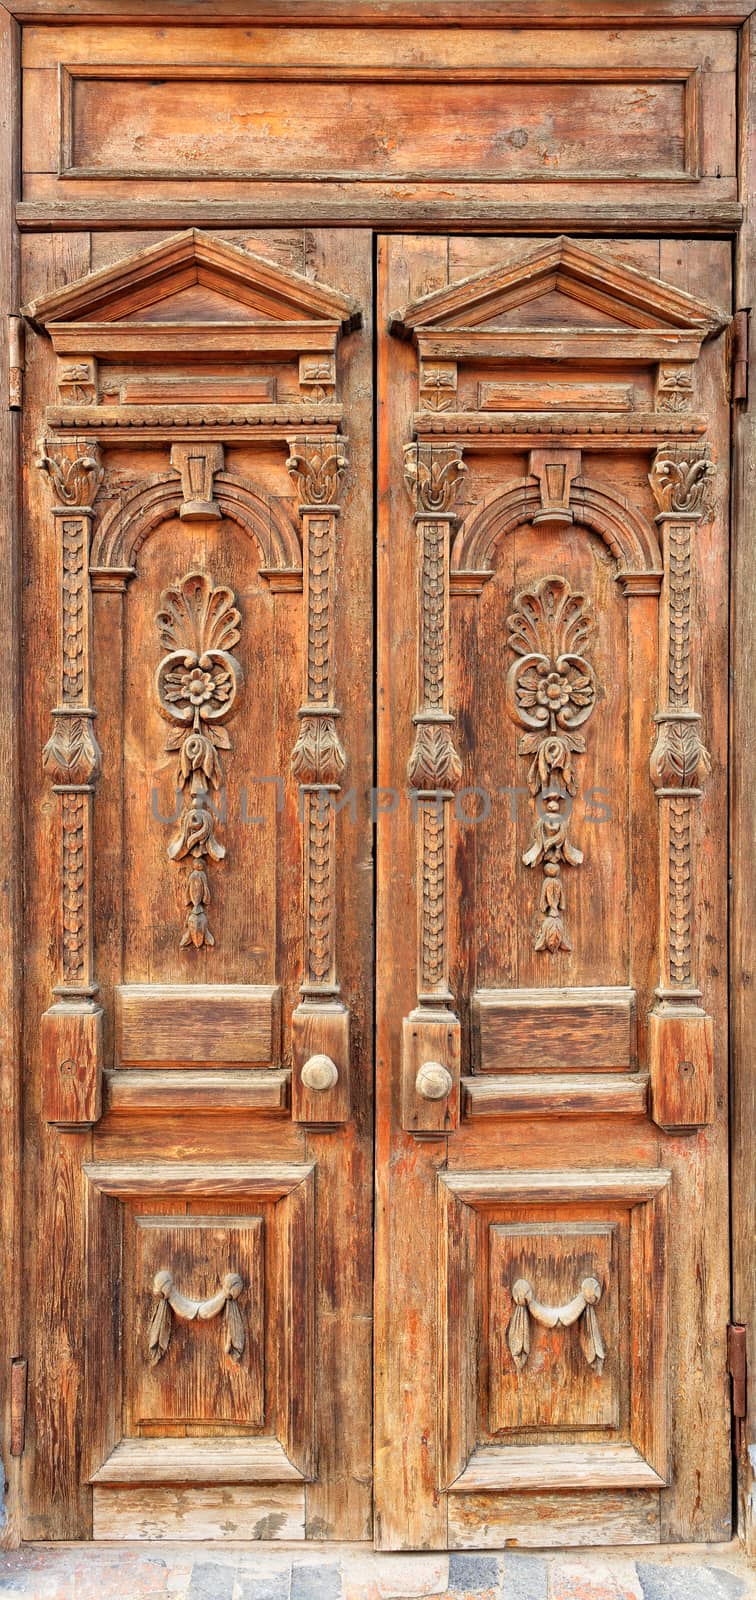 Old weathered wooden entrance doors with carved elements and a symmetrical pattern on the wings in the Ukrainian style. by Sergii